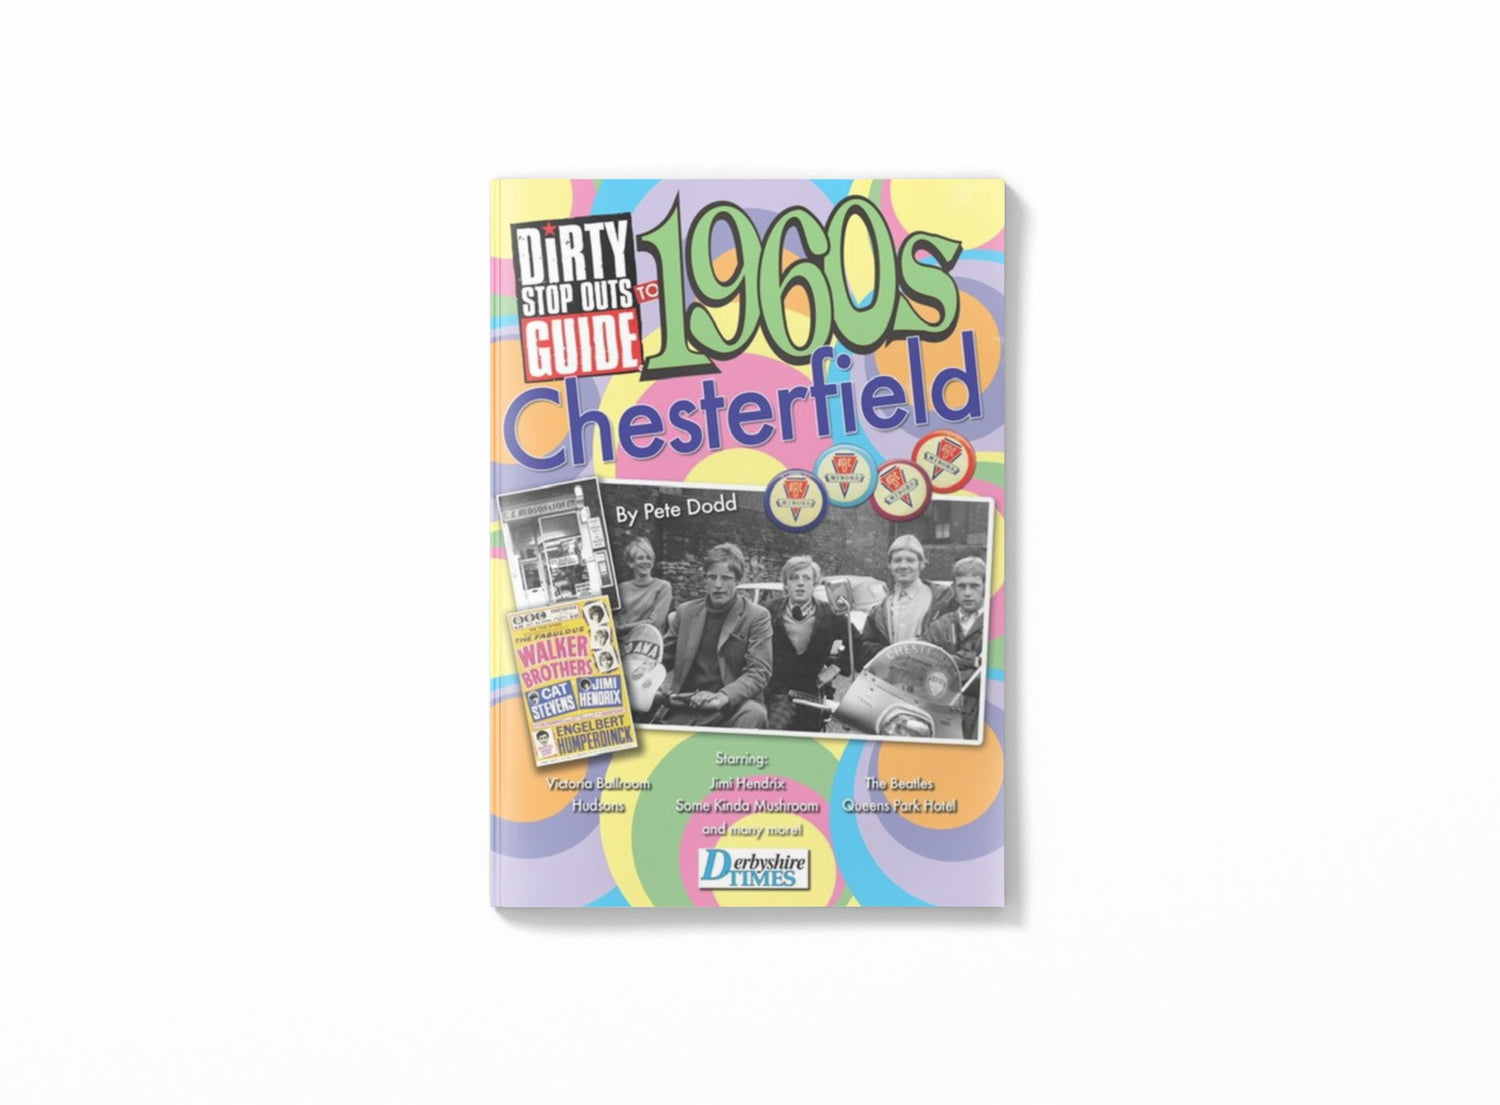 Chesterfield - Dirty Stop Out's Guide to the 1960s